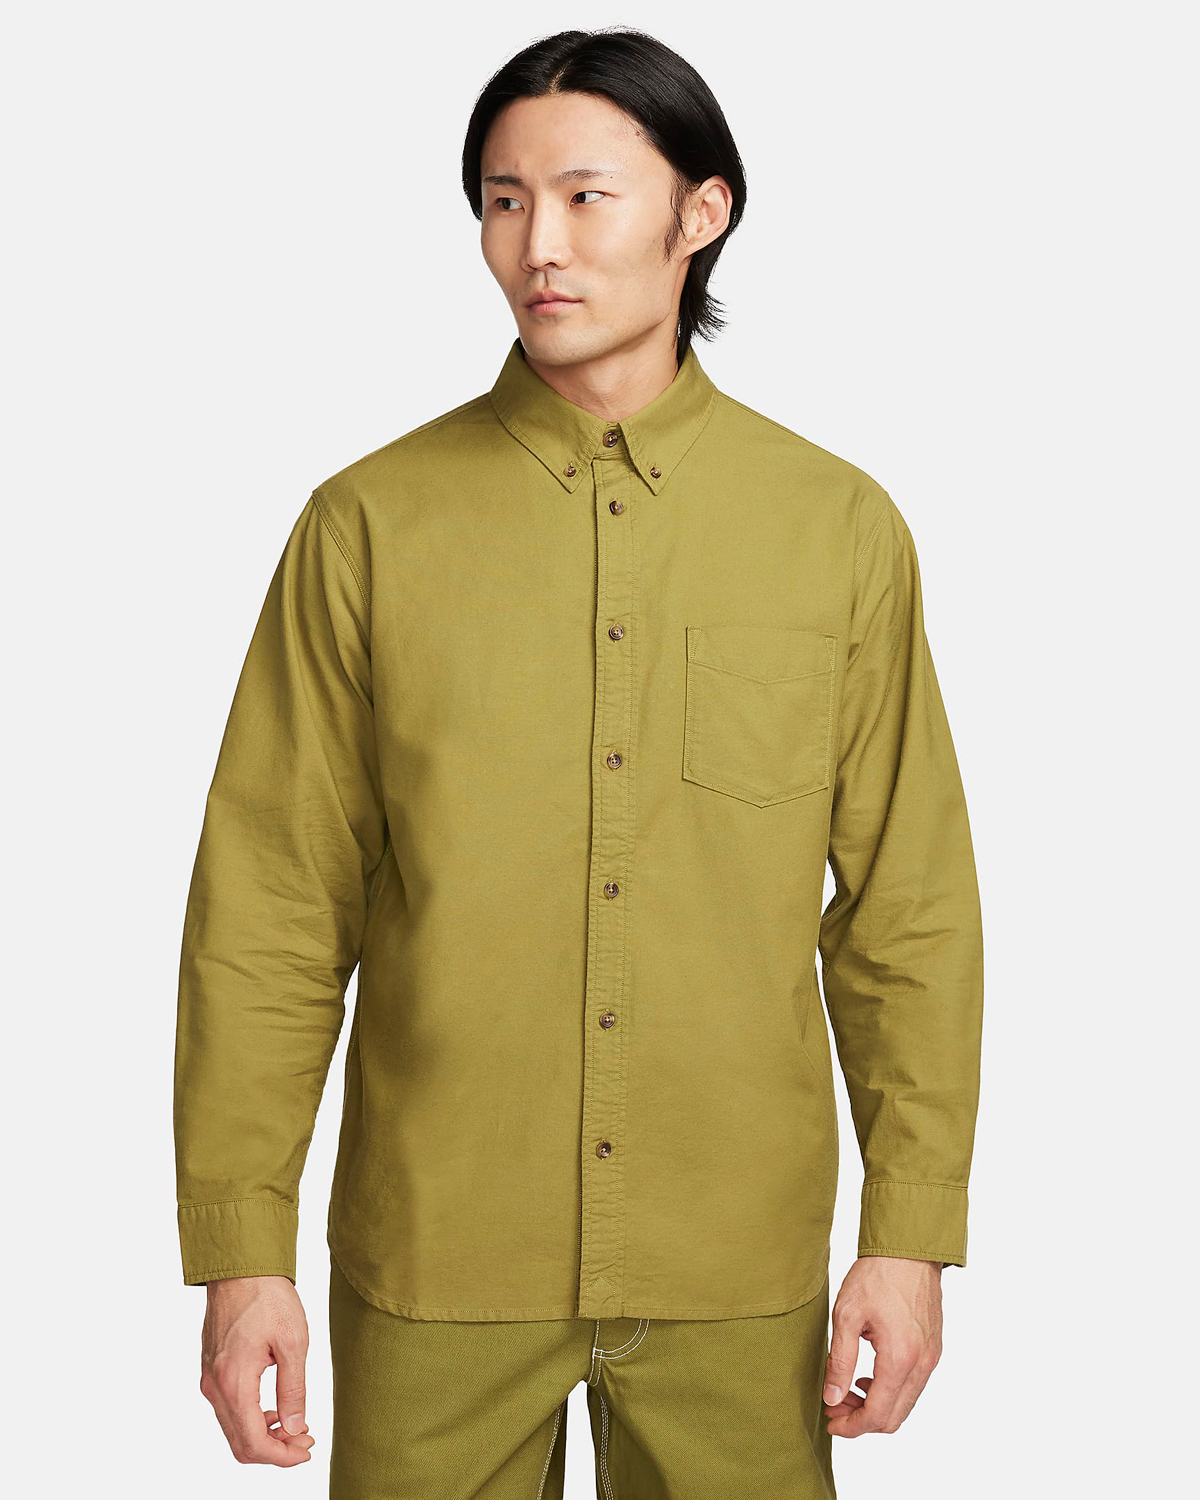 Nike Life Oxford Button Down Top Pacific Moss